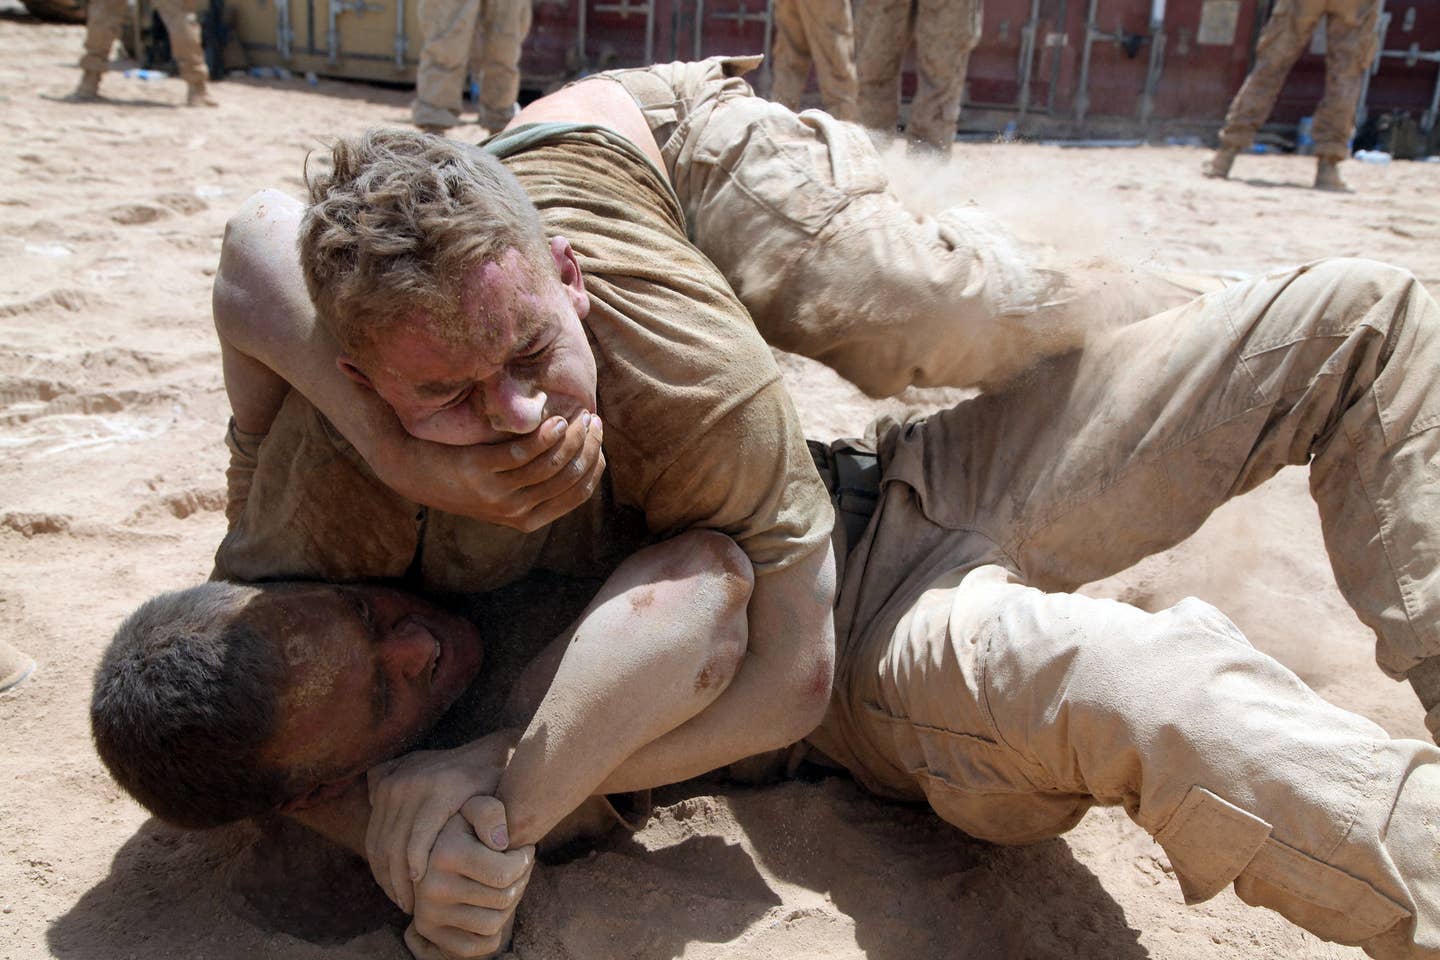 This isn't really how most self-defense classes at the mall tend to play out. (USMC Photo by LCpl Ismael Ortega)